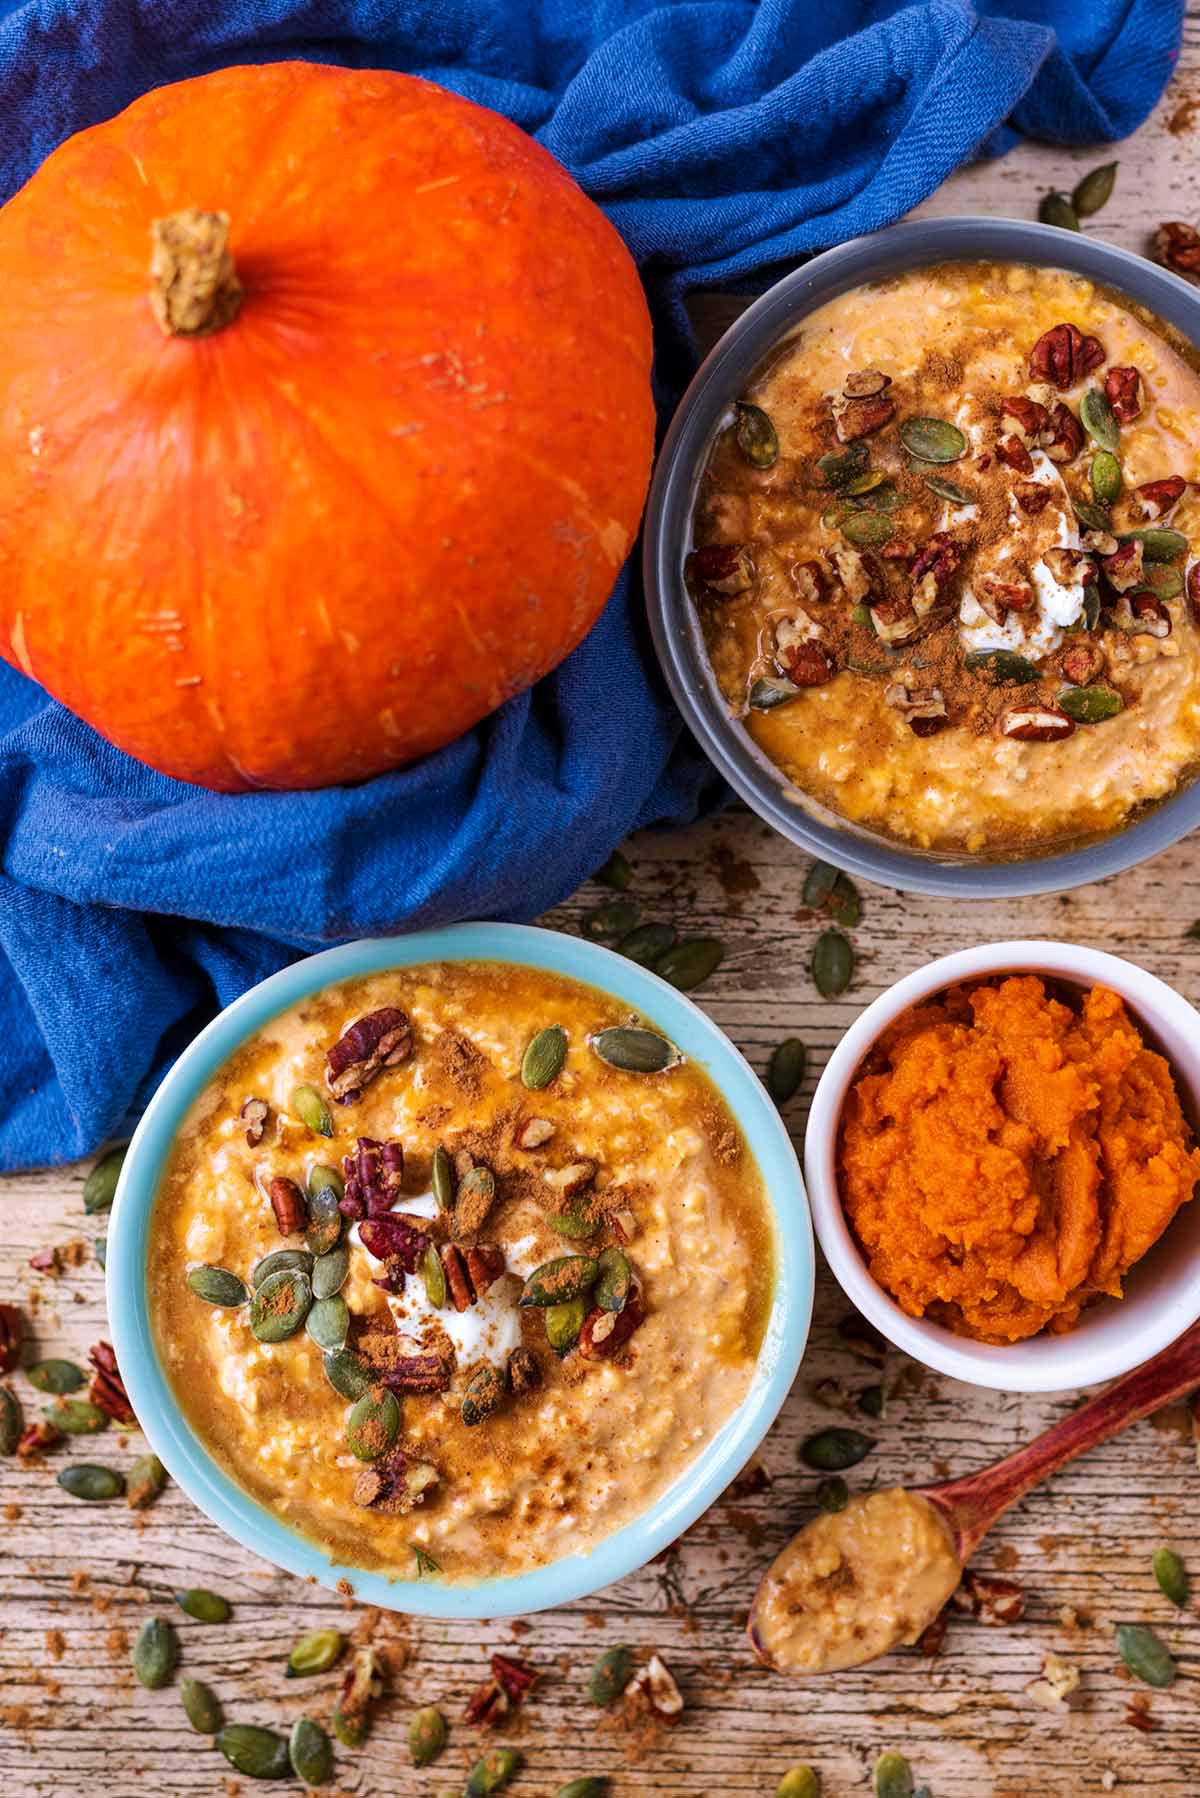 Two bowls of overnight oats next to a whole pumpkin.